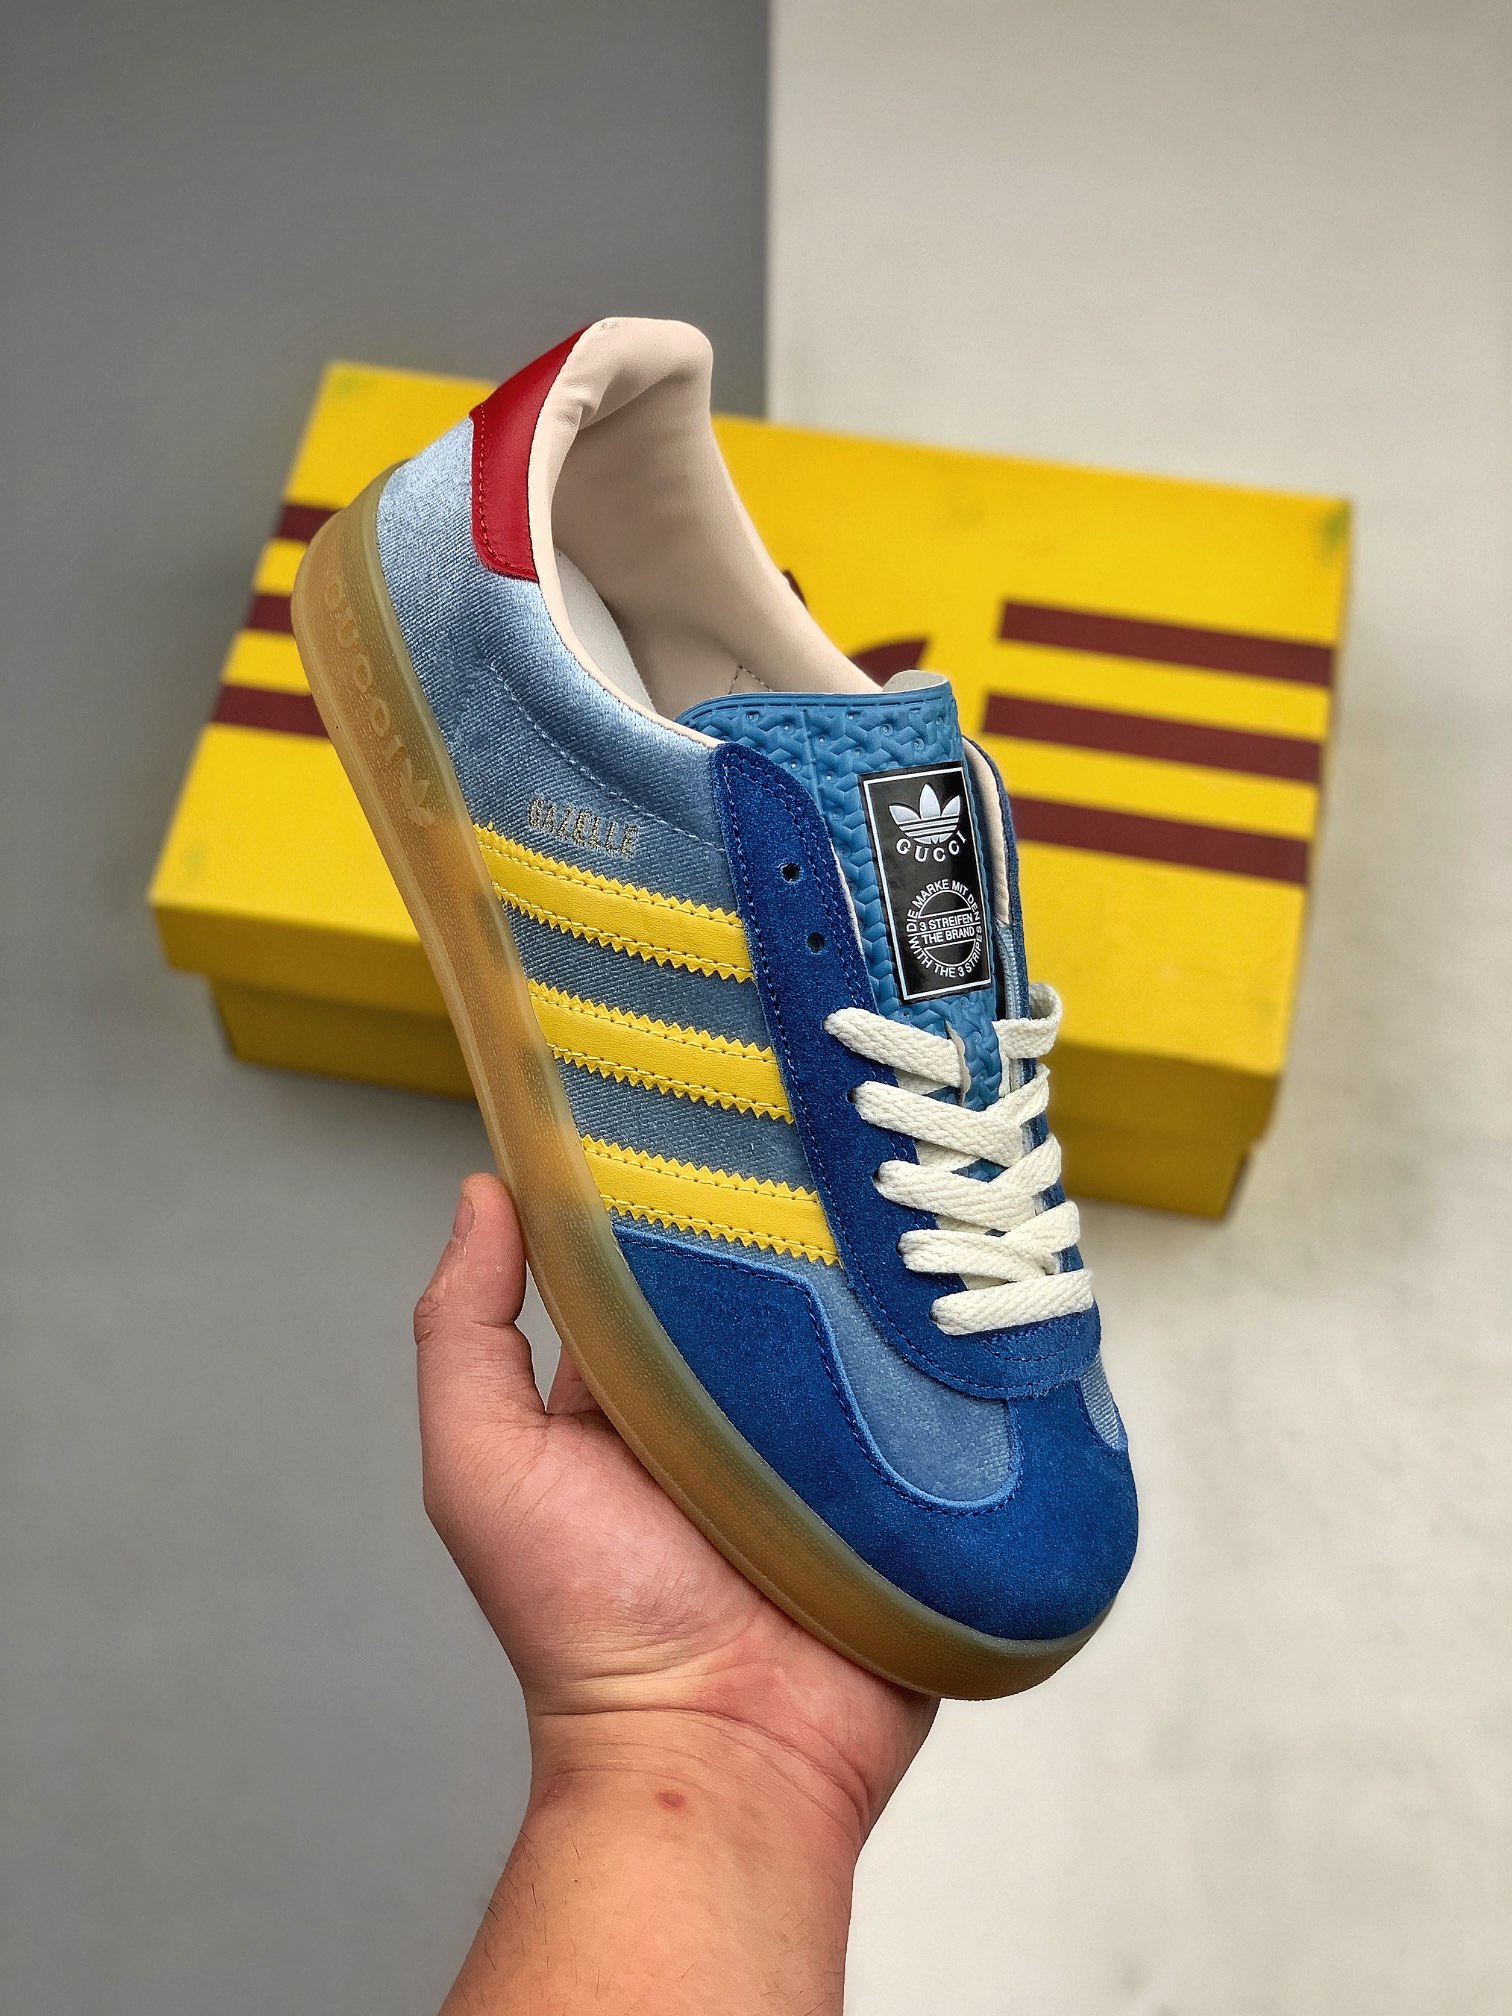 Adidas x Gucci Gazelle Blue Sneakers - Limited Edition Collaboration